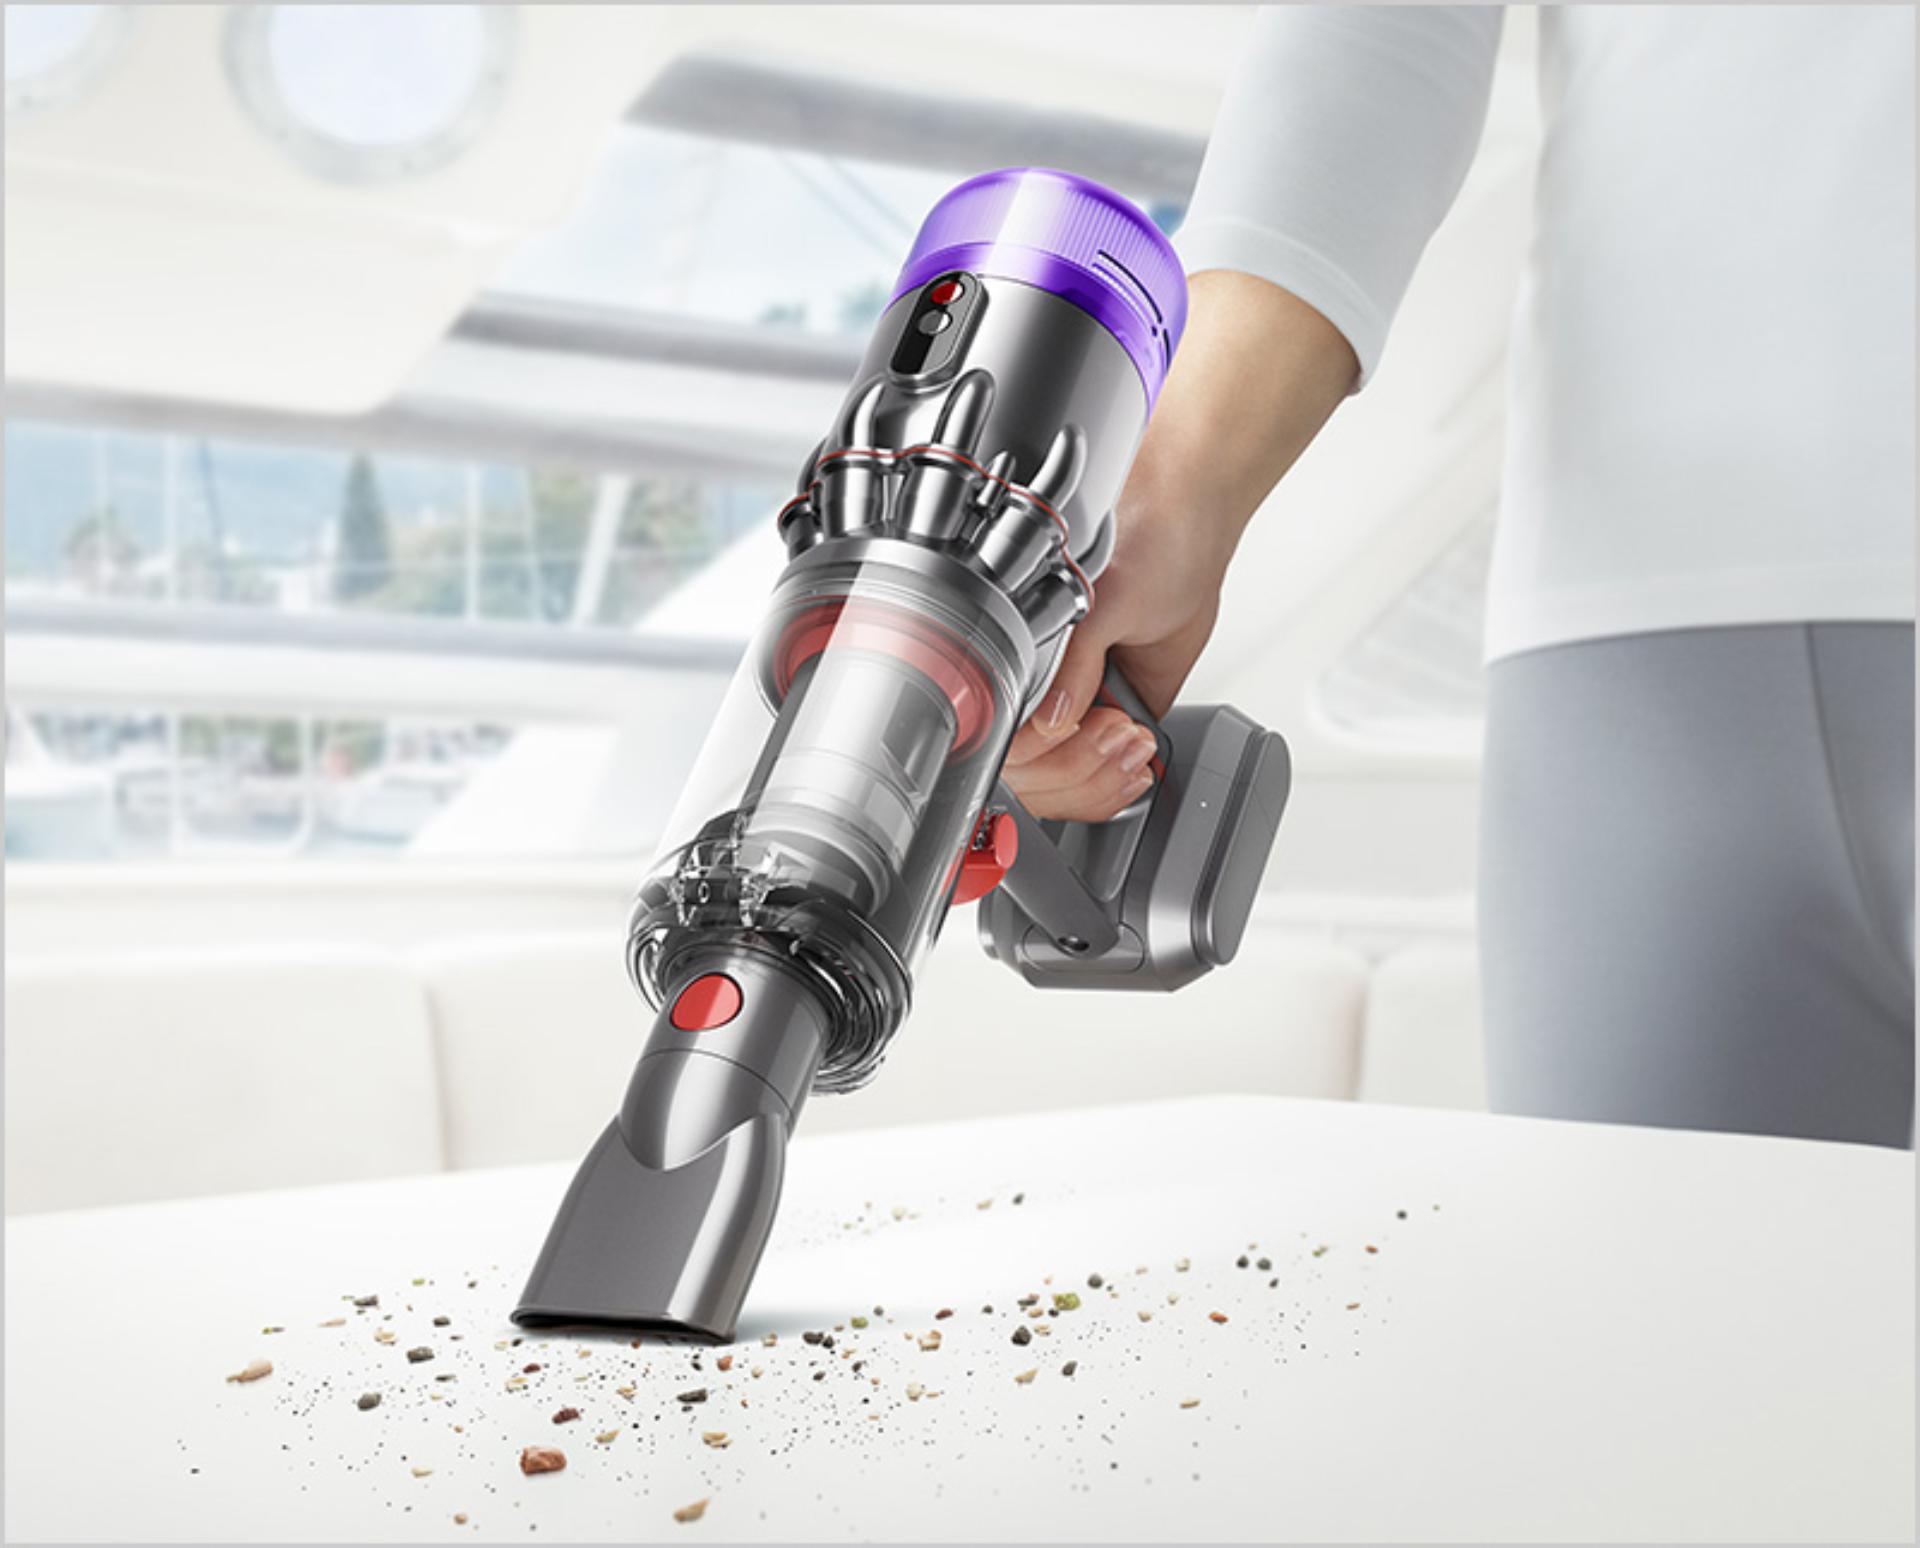 Dyson Micro 1.5kg vacuum cleaning a mattress